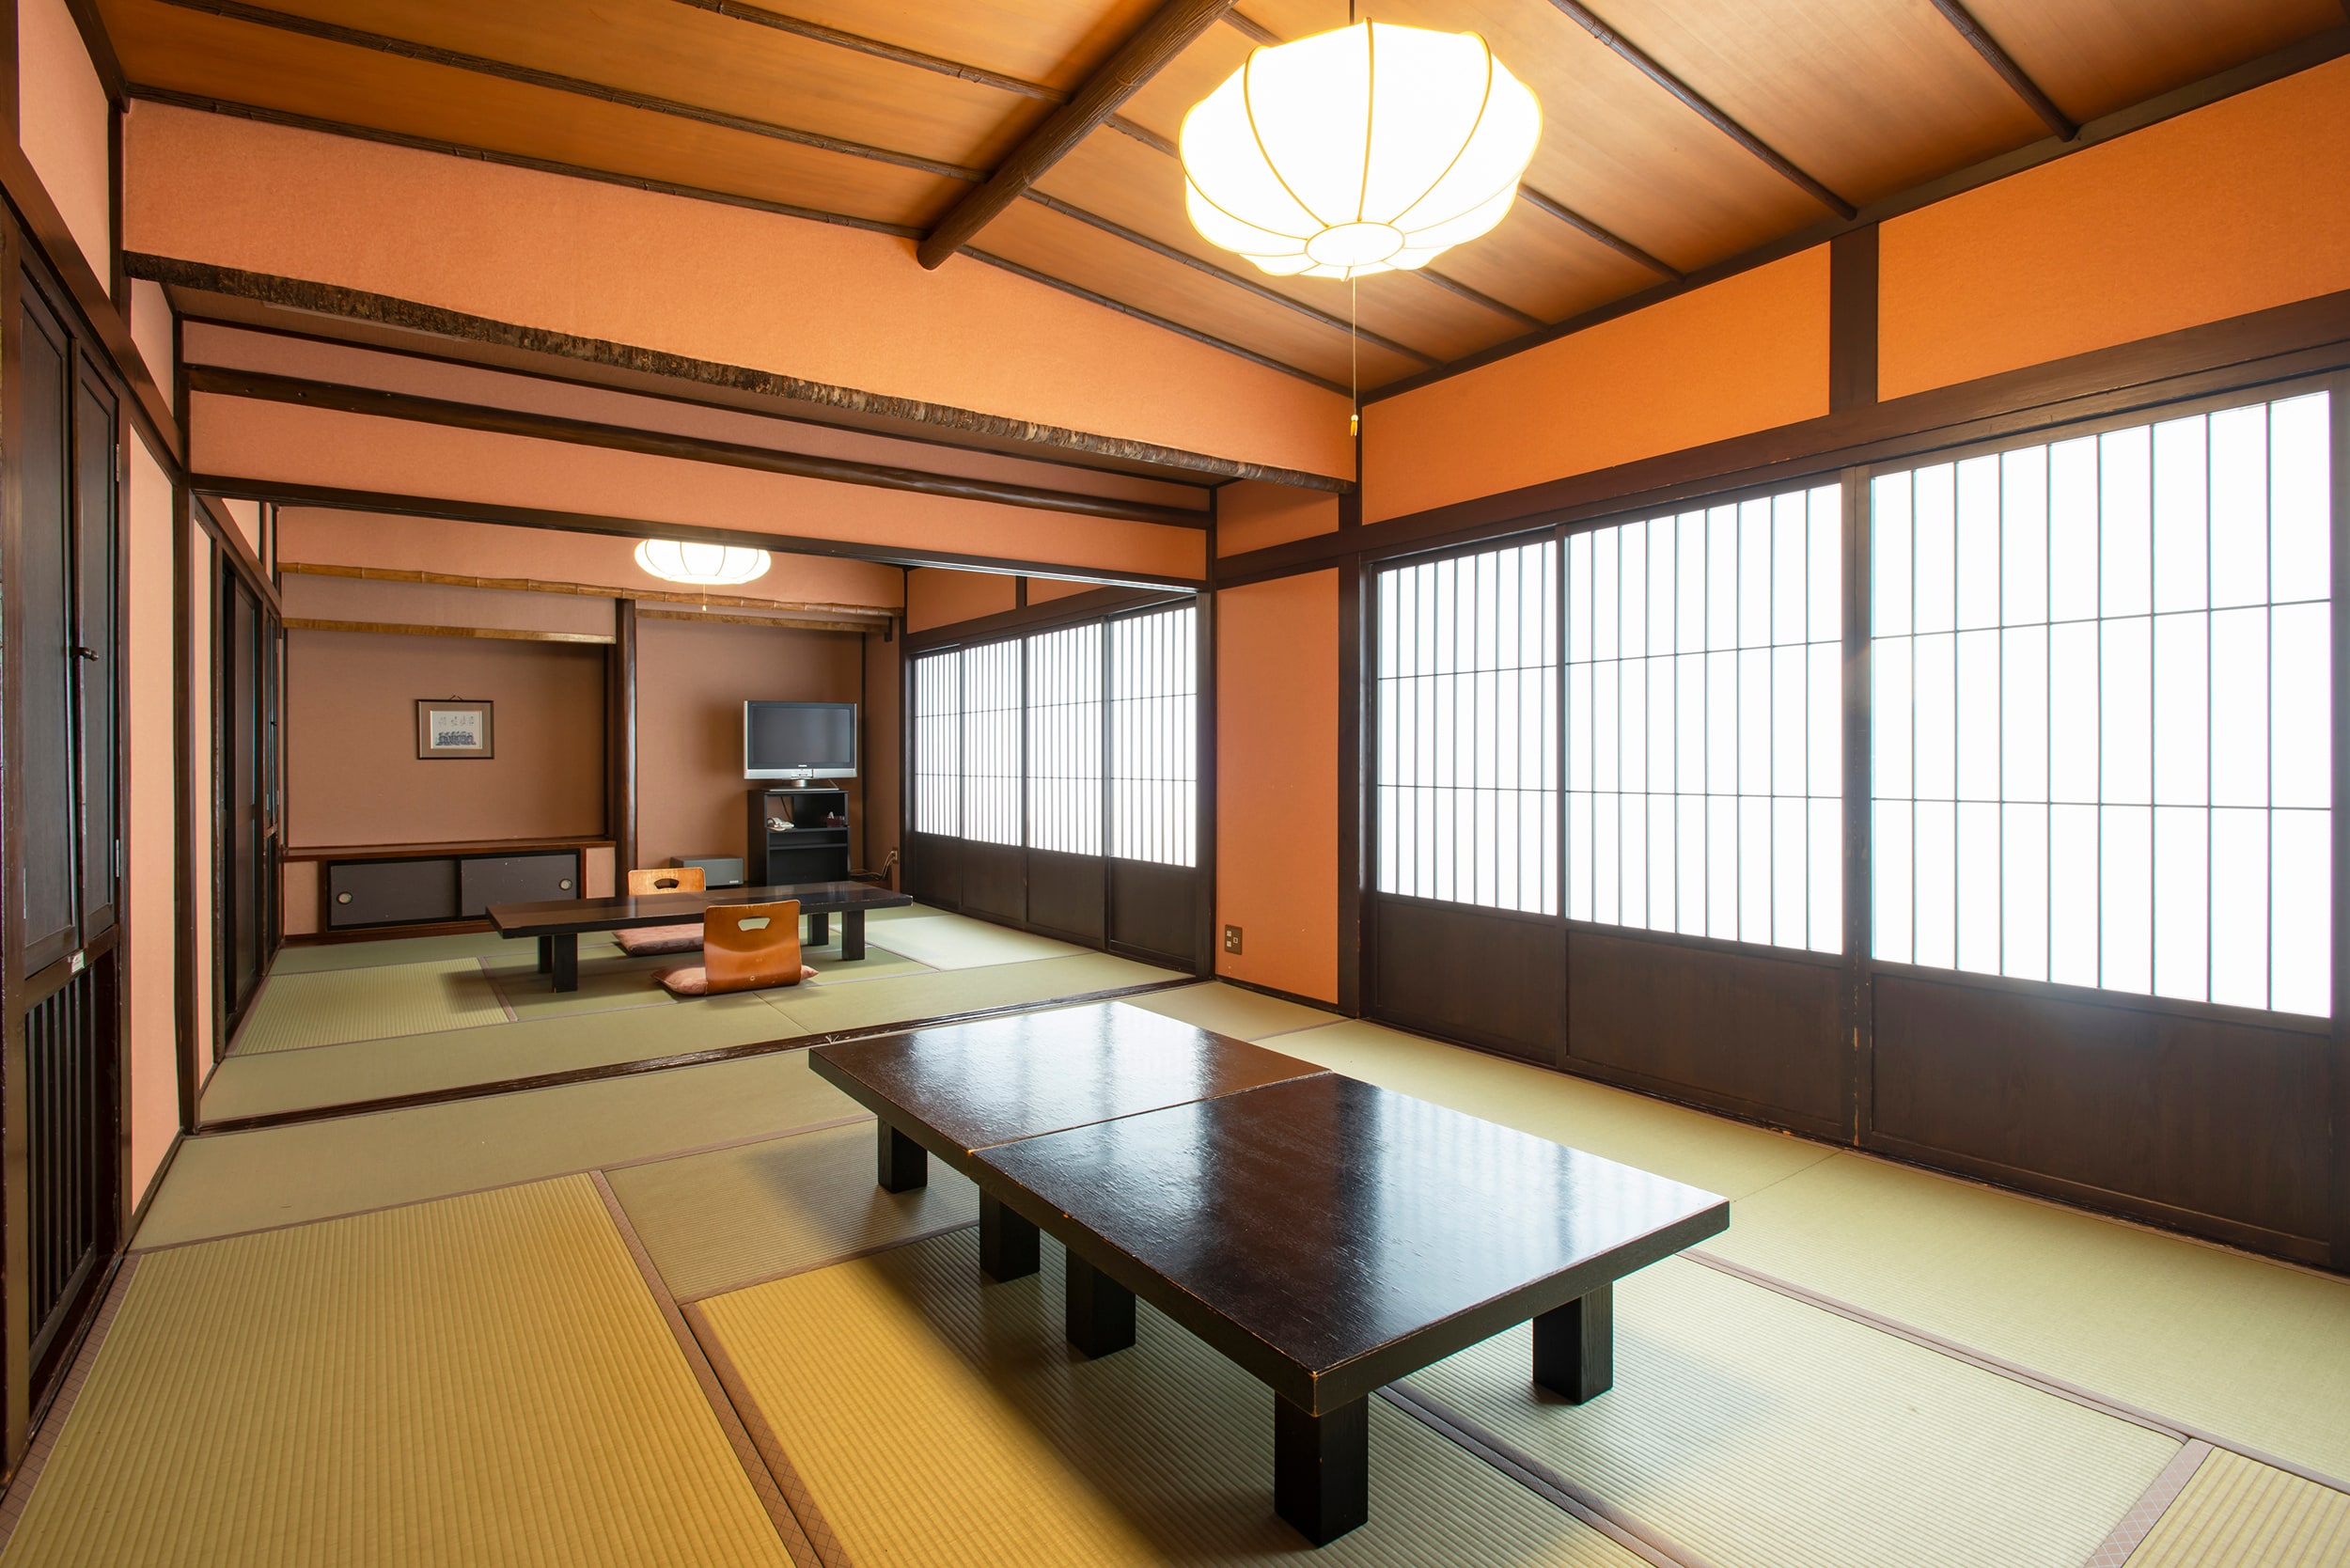 Two Japanese-style rooms example